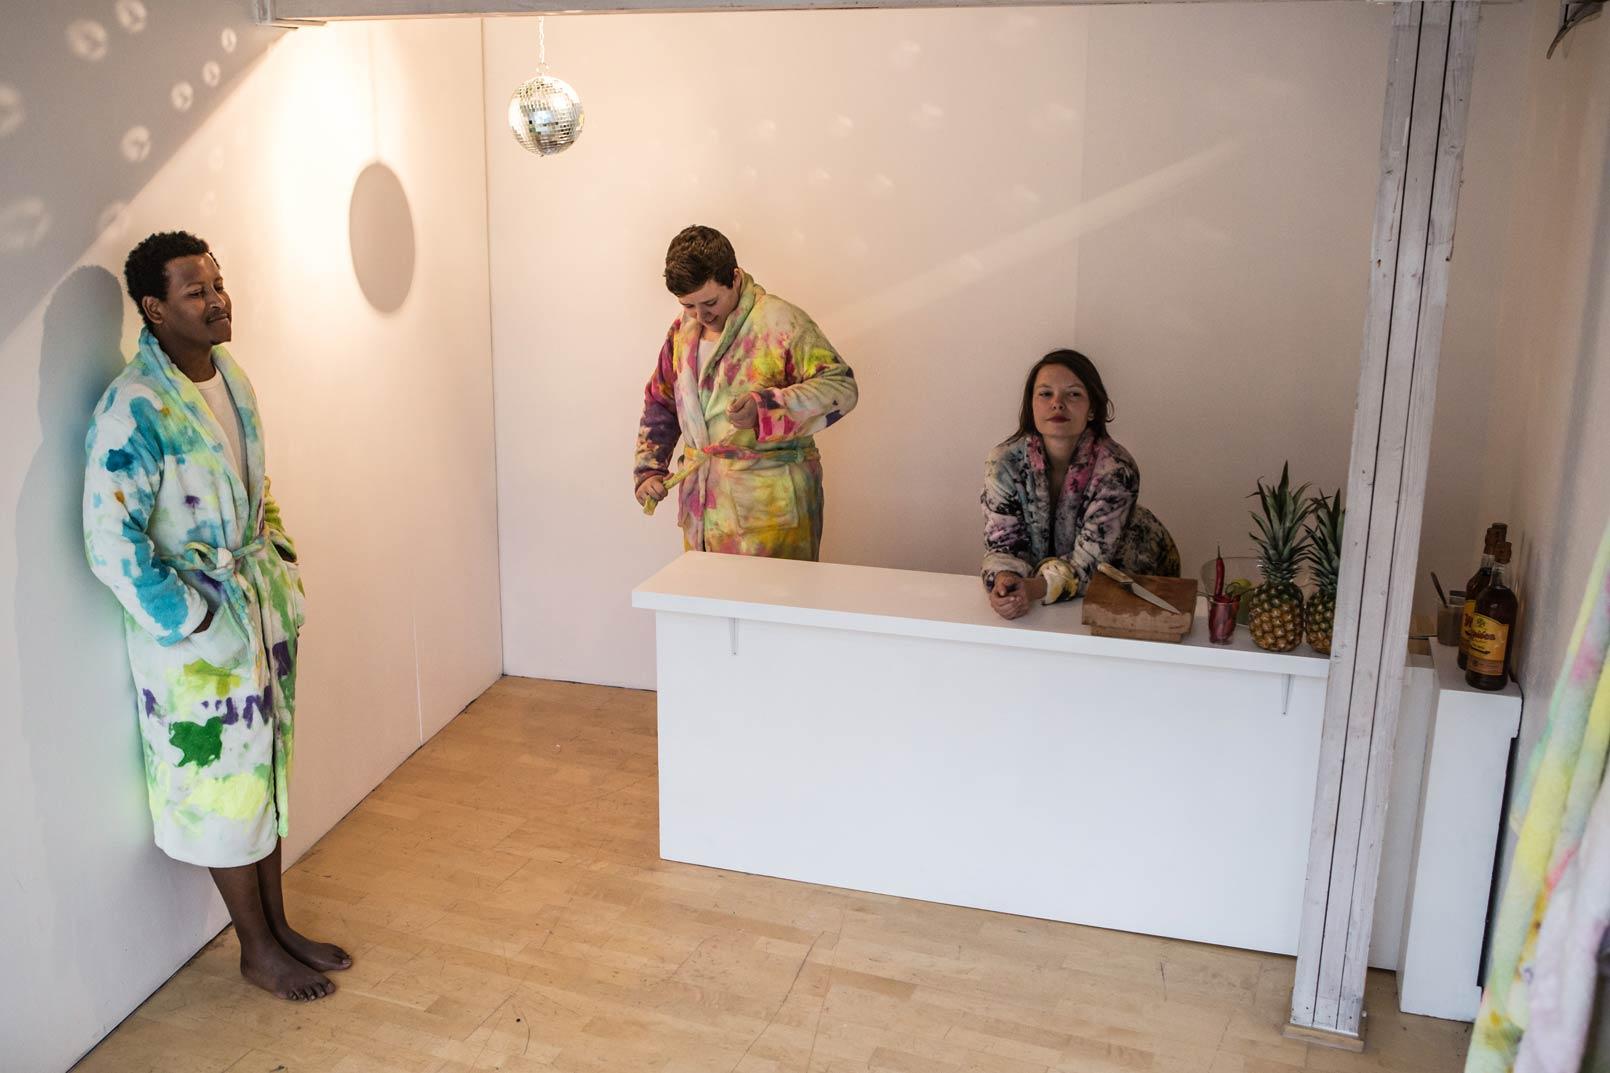 Limited edition of sauna sessions with paintings as towels and robes/ robes and towels as paintings in SmallProjects Tromso gallery. 2014. Photo by Kasia Mikolajewska 